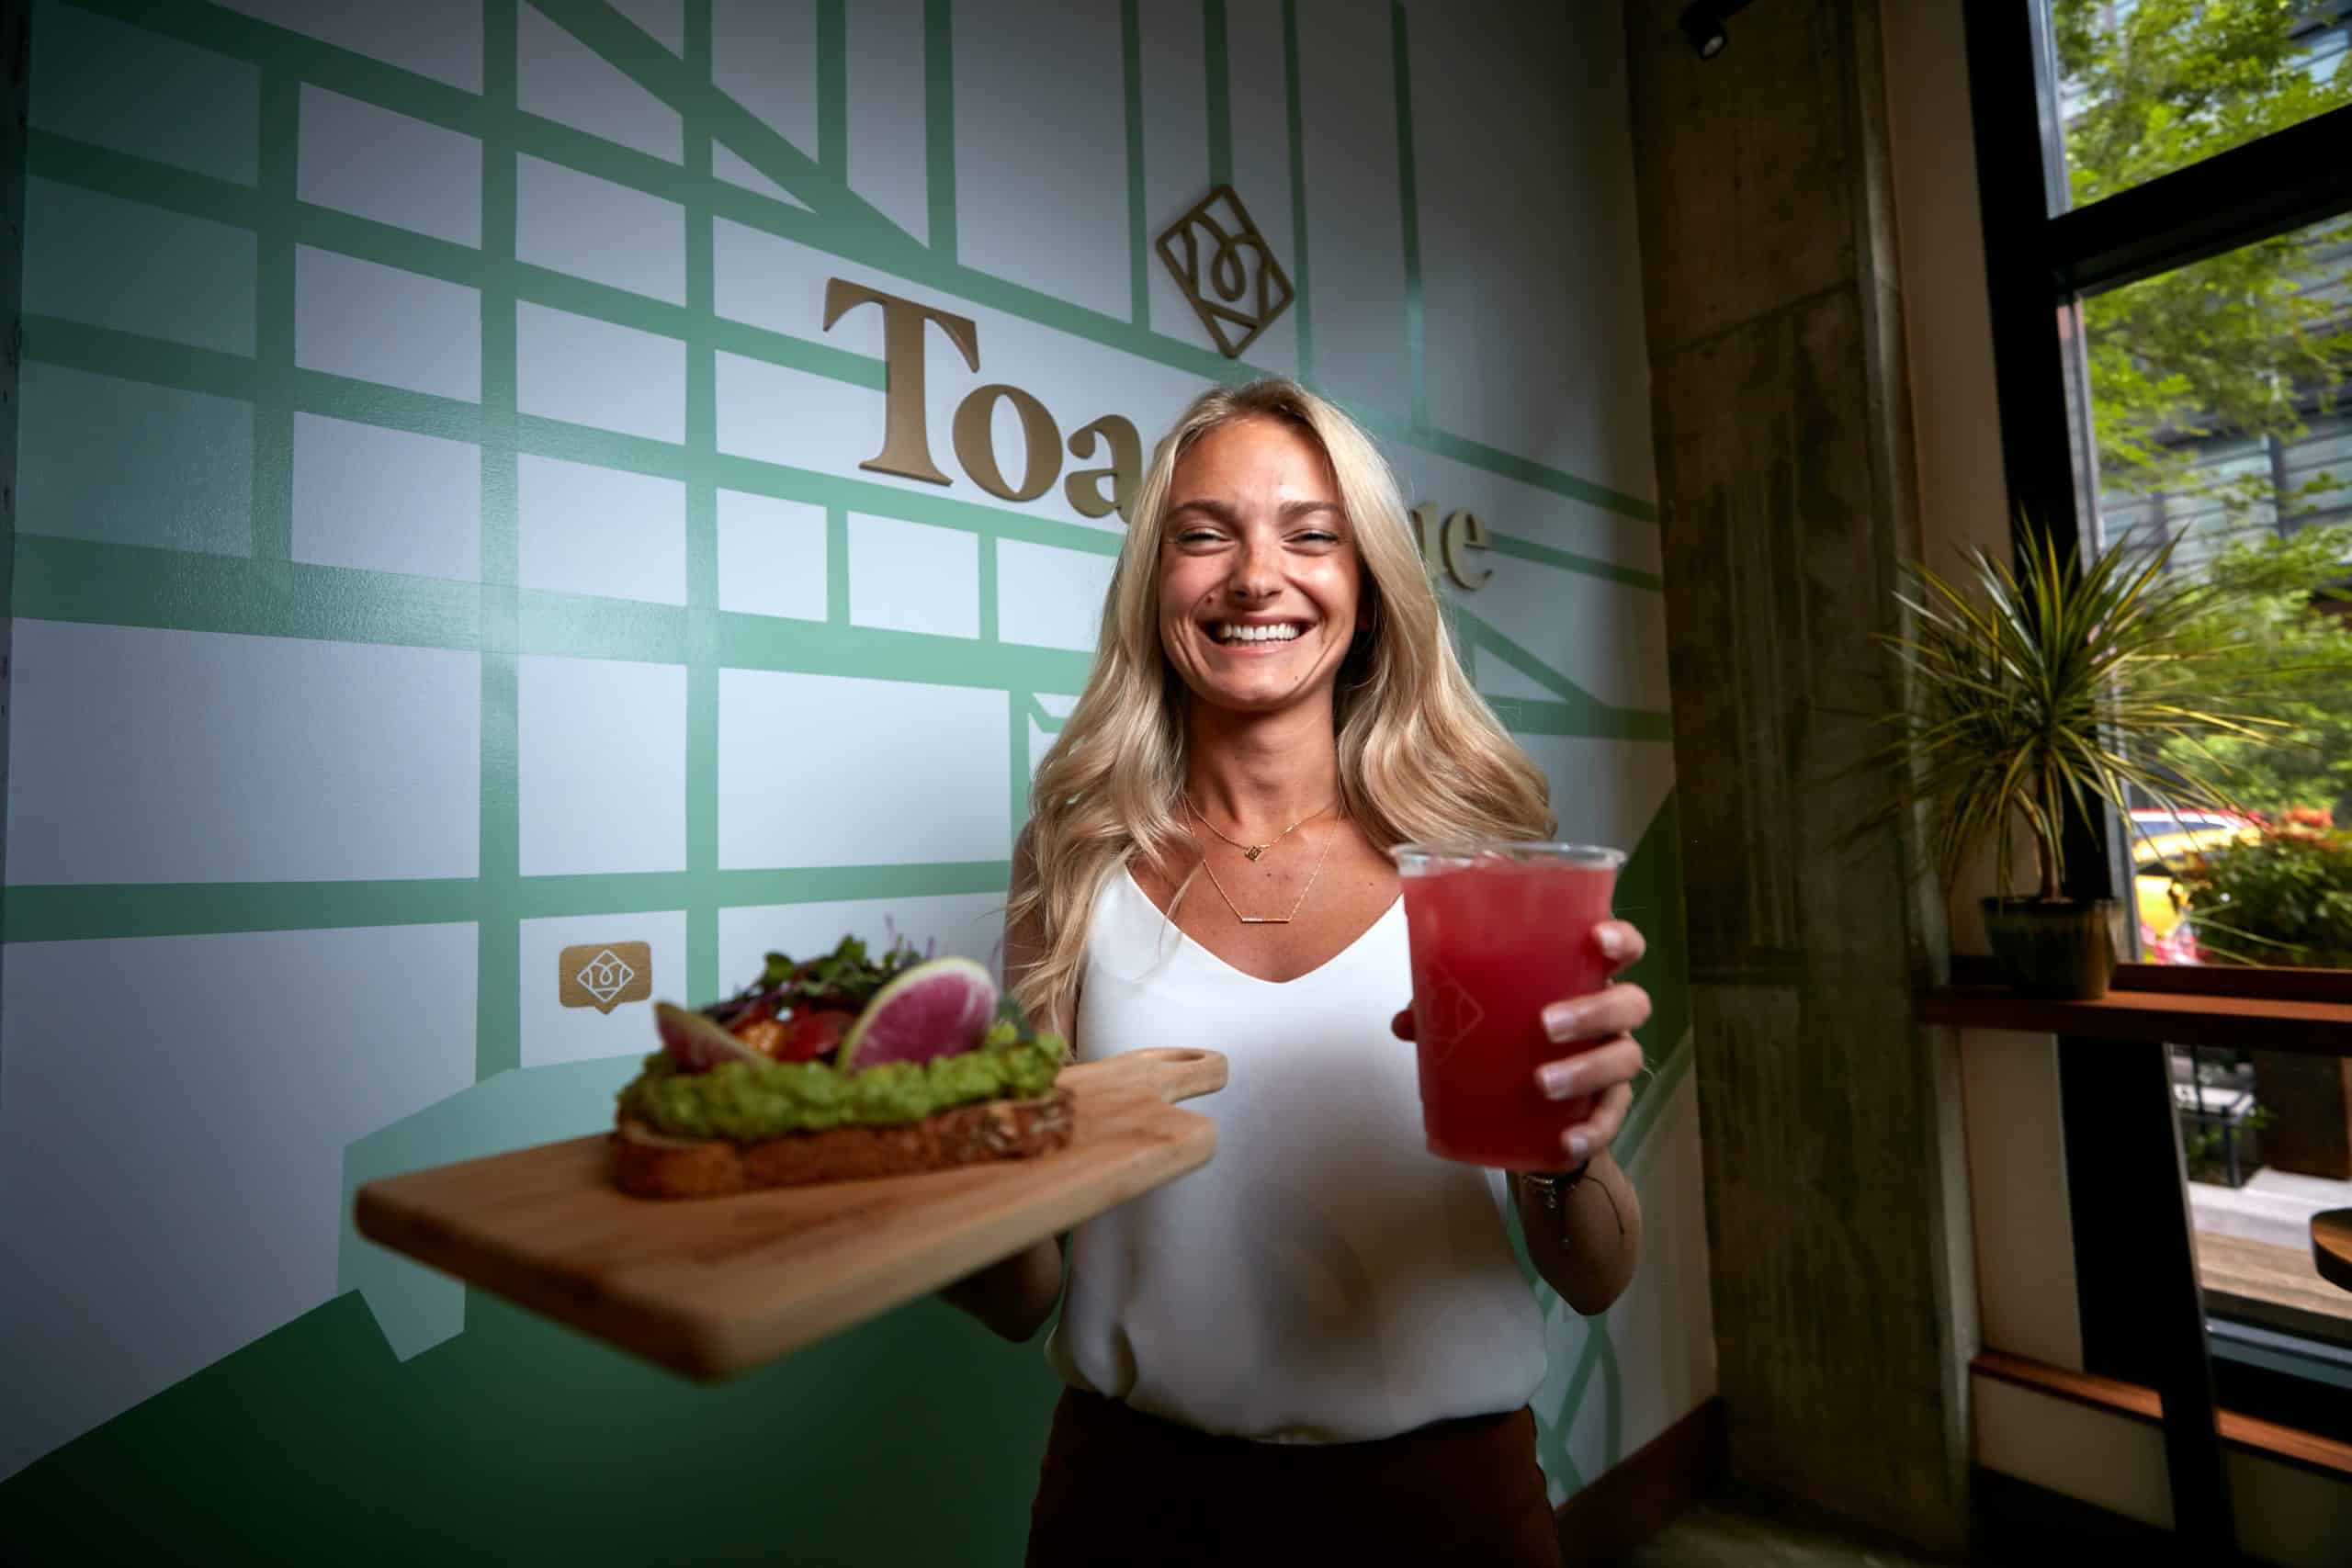 Toastique Breakfast Franchise Founder Brianna Keefe.